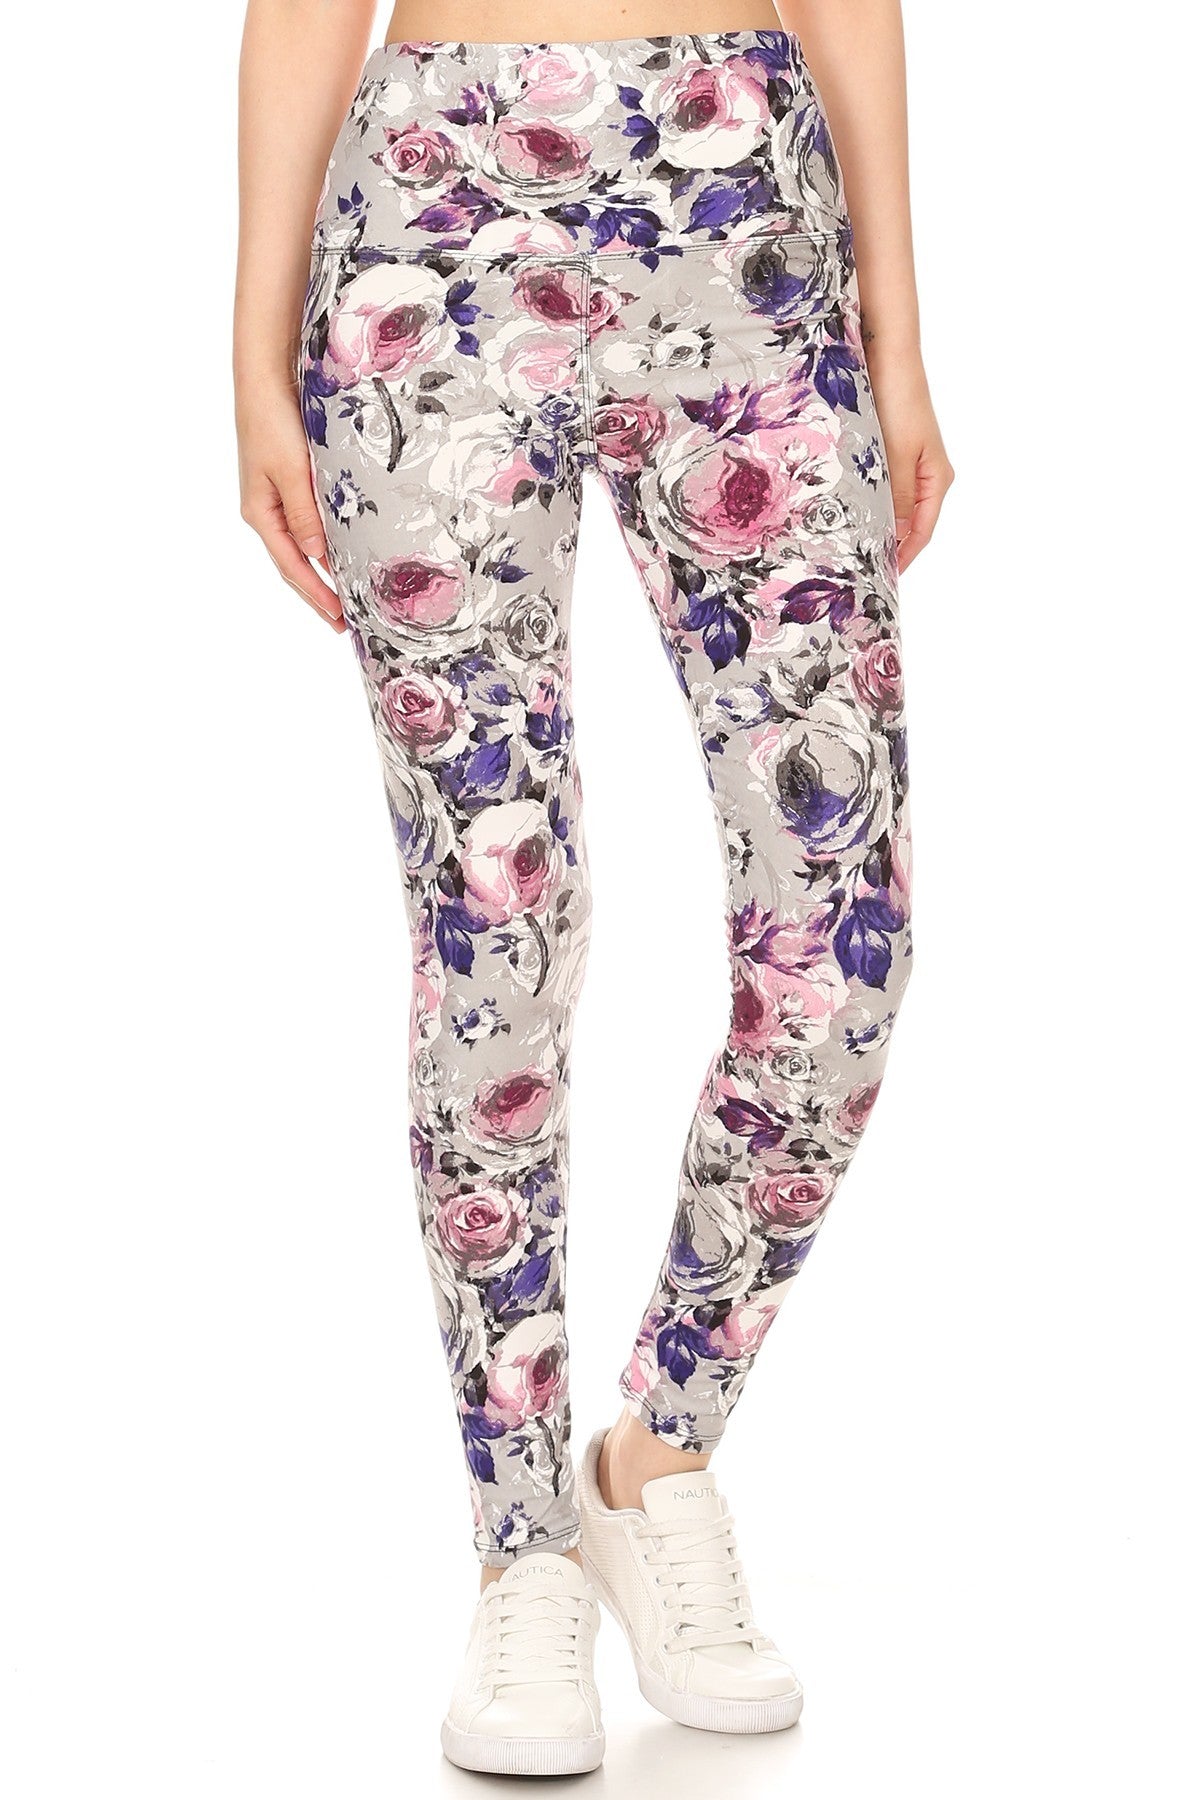 Floral Printed Knit Legging With High Waist king-general-store-5710.myshopify.com